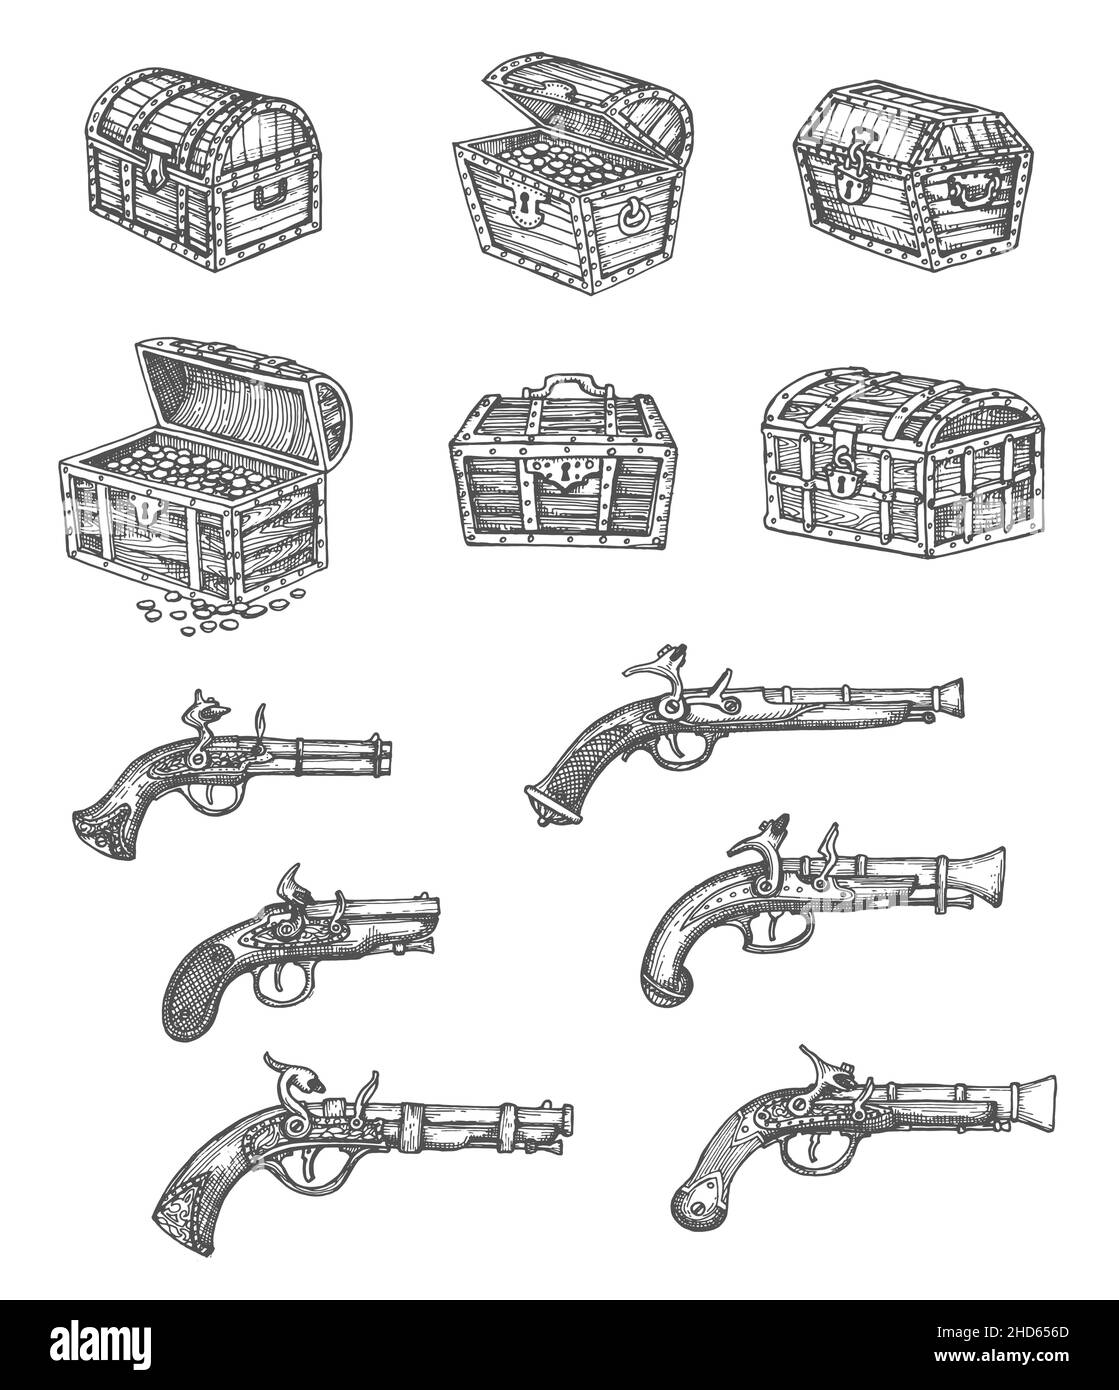 Vintage isolated pirate chest and musket gun vector sketches. Hand drawn pirate treasure chests or boxes full of gold coins and jewelry with locks, ol Stock Vector